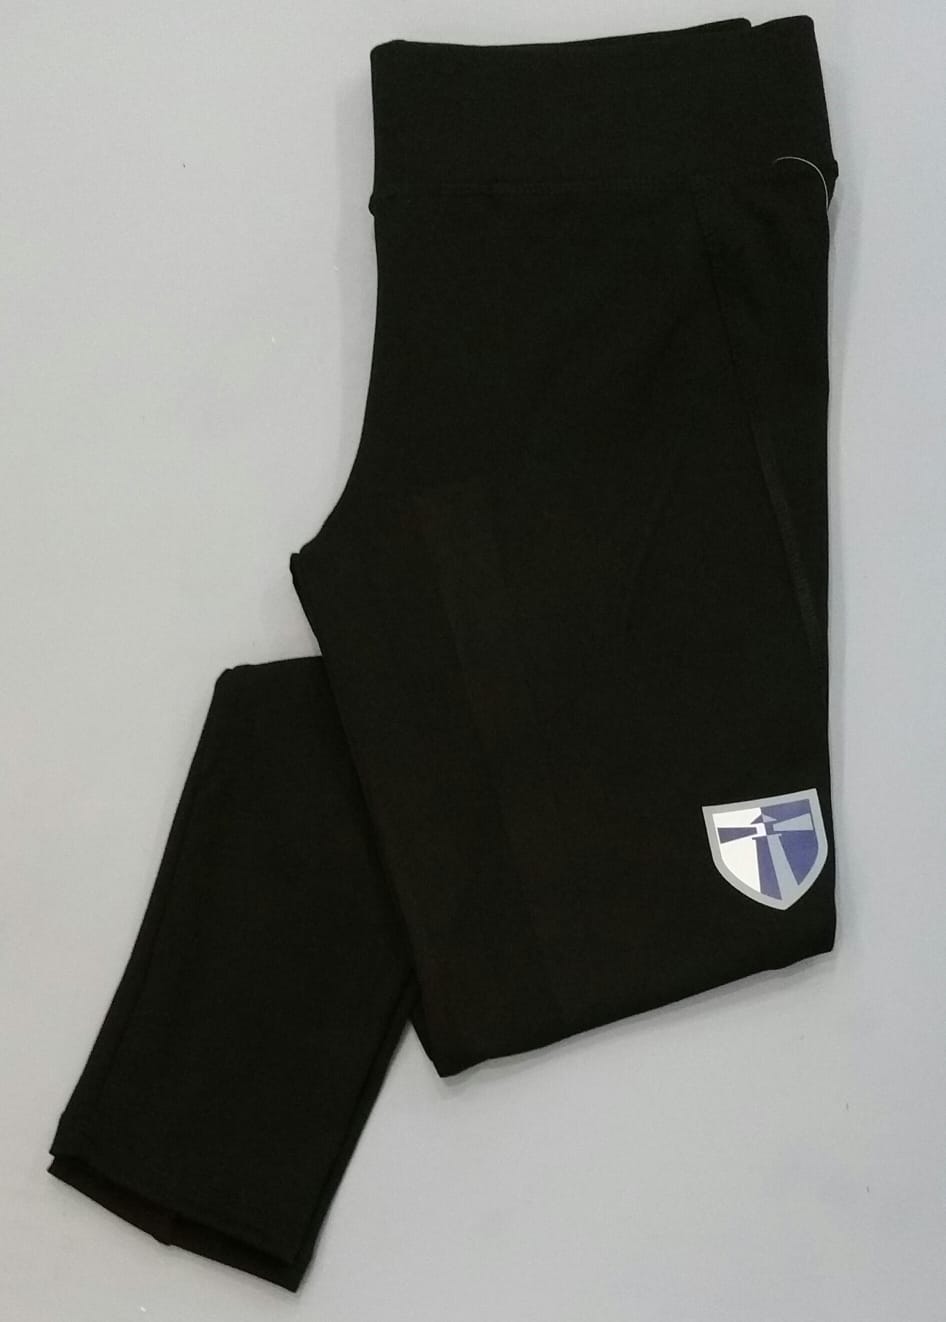 Cool Athletic Sports Leggings with printed school logo